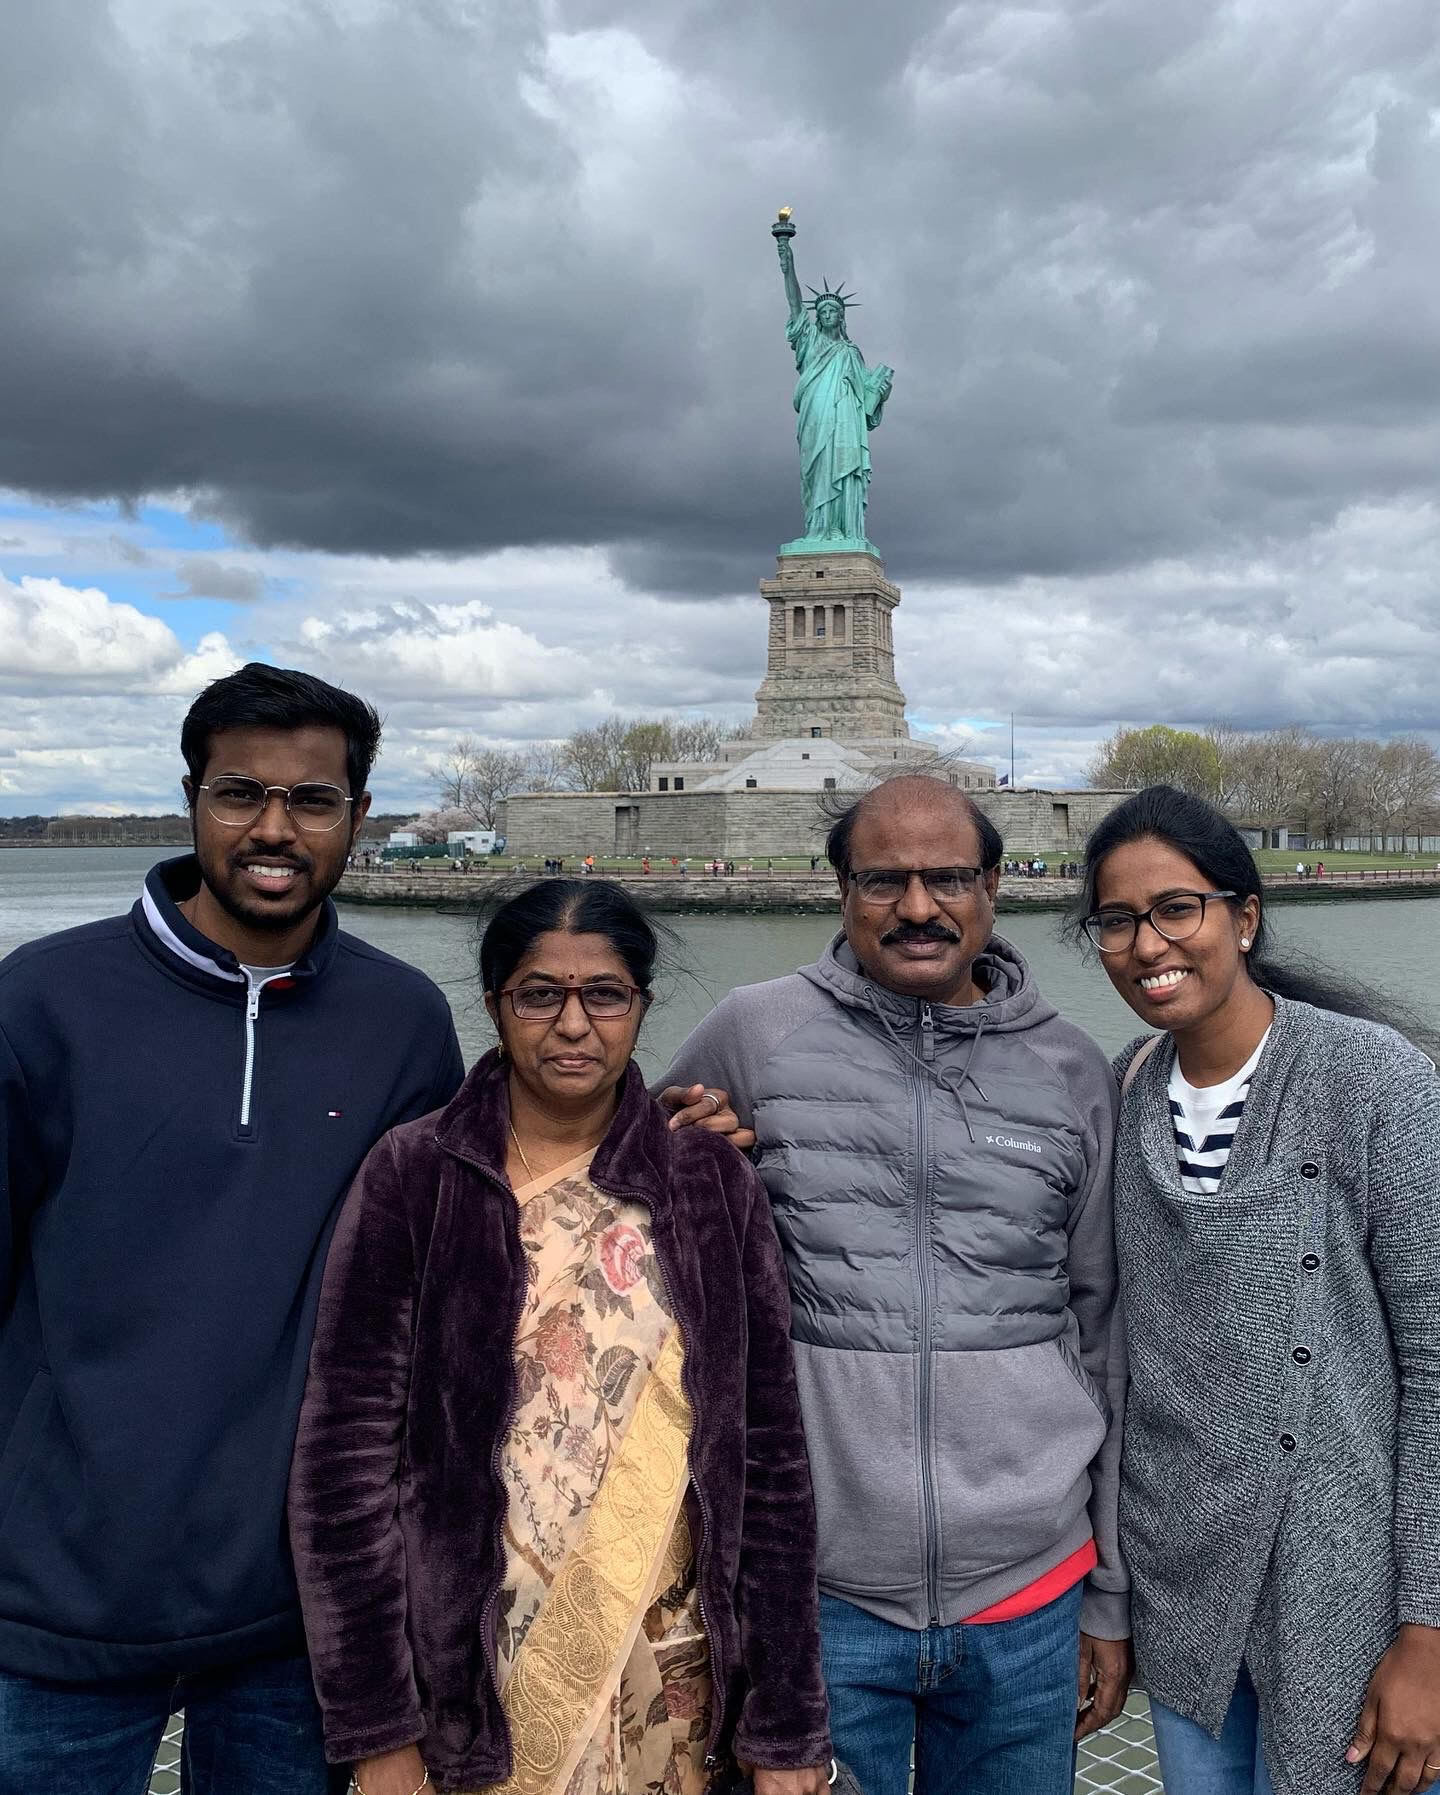 Family in front of Statue of Liberty